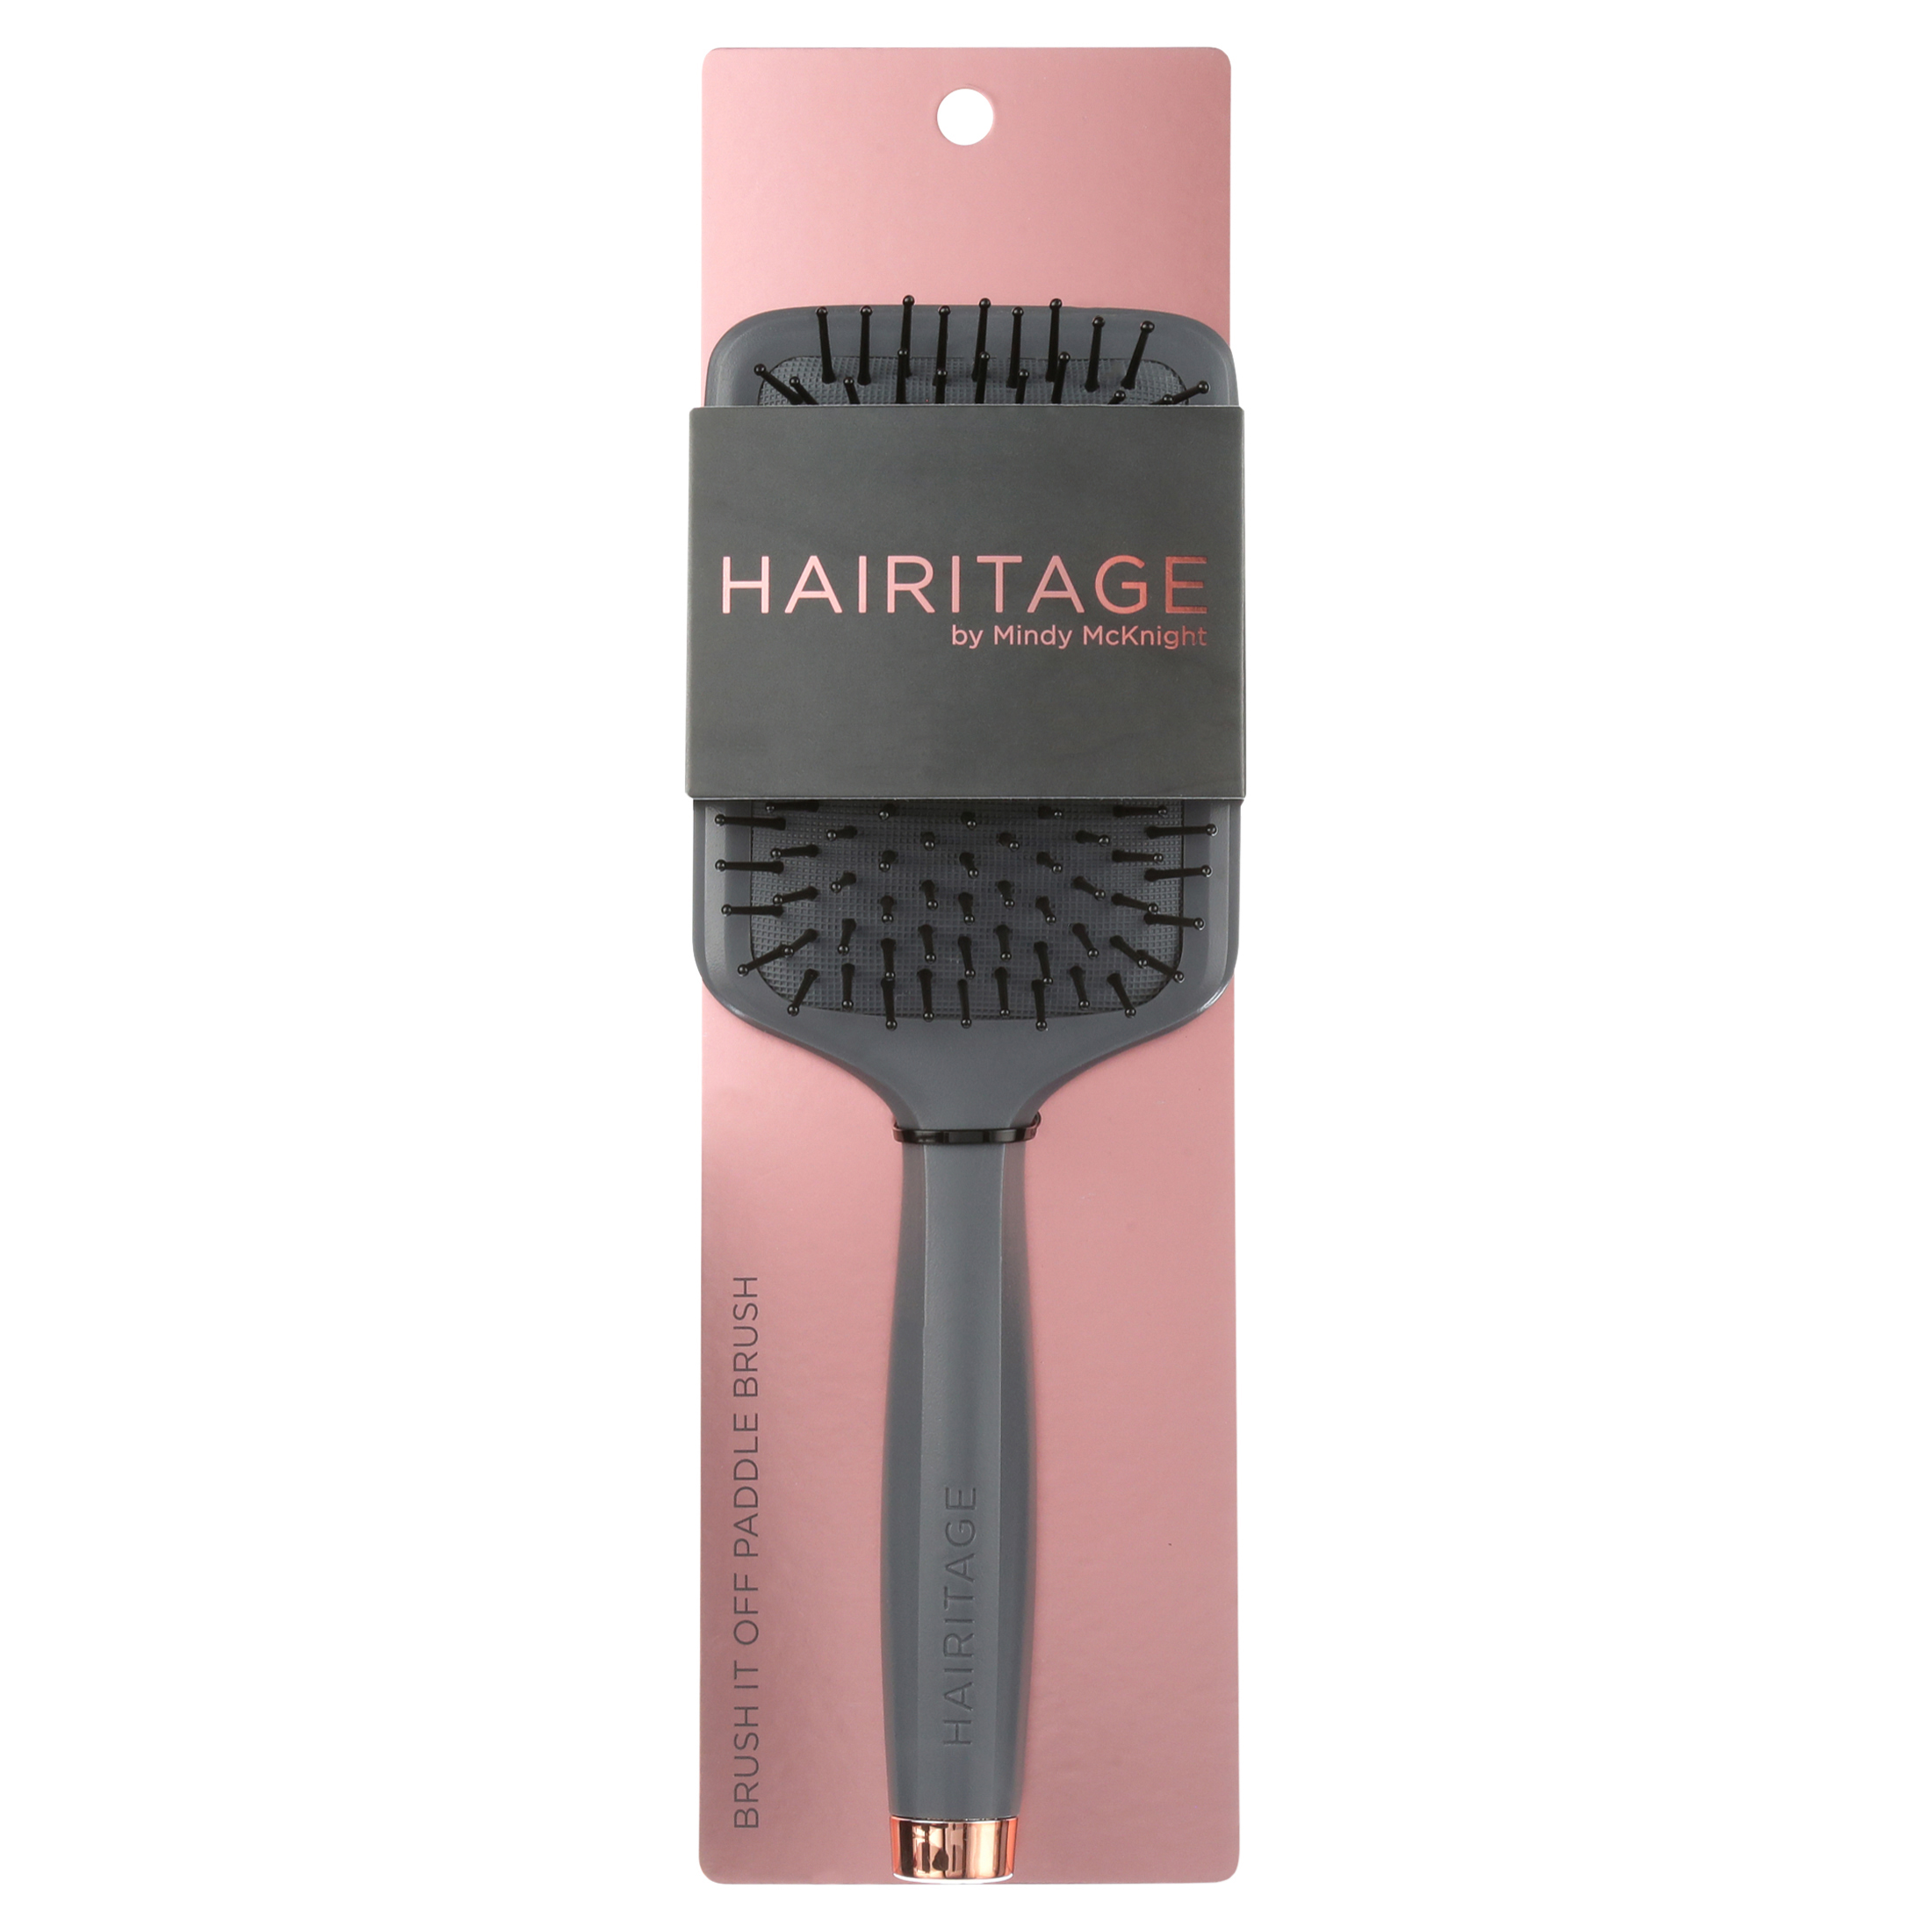 Hairitage Brush It Off Detangling & Smoothing Paddle Hair Brush for Women | Anti Frizz | for Wet & Dry Hair, 1 PC - image 10 of 12